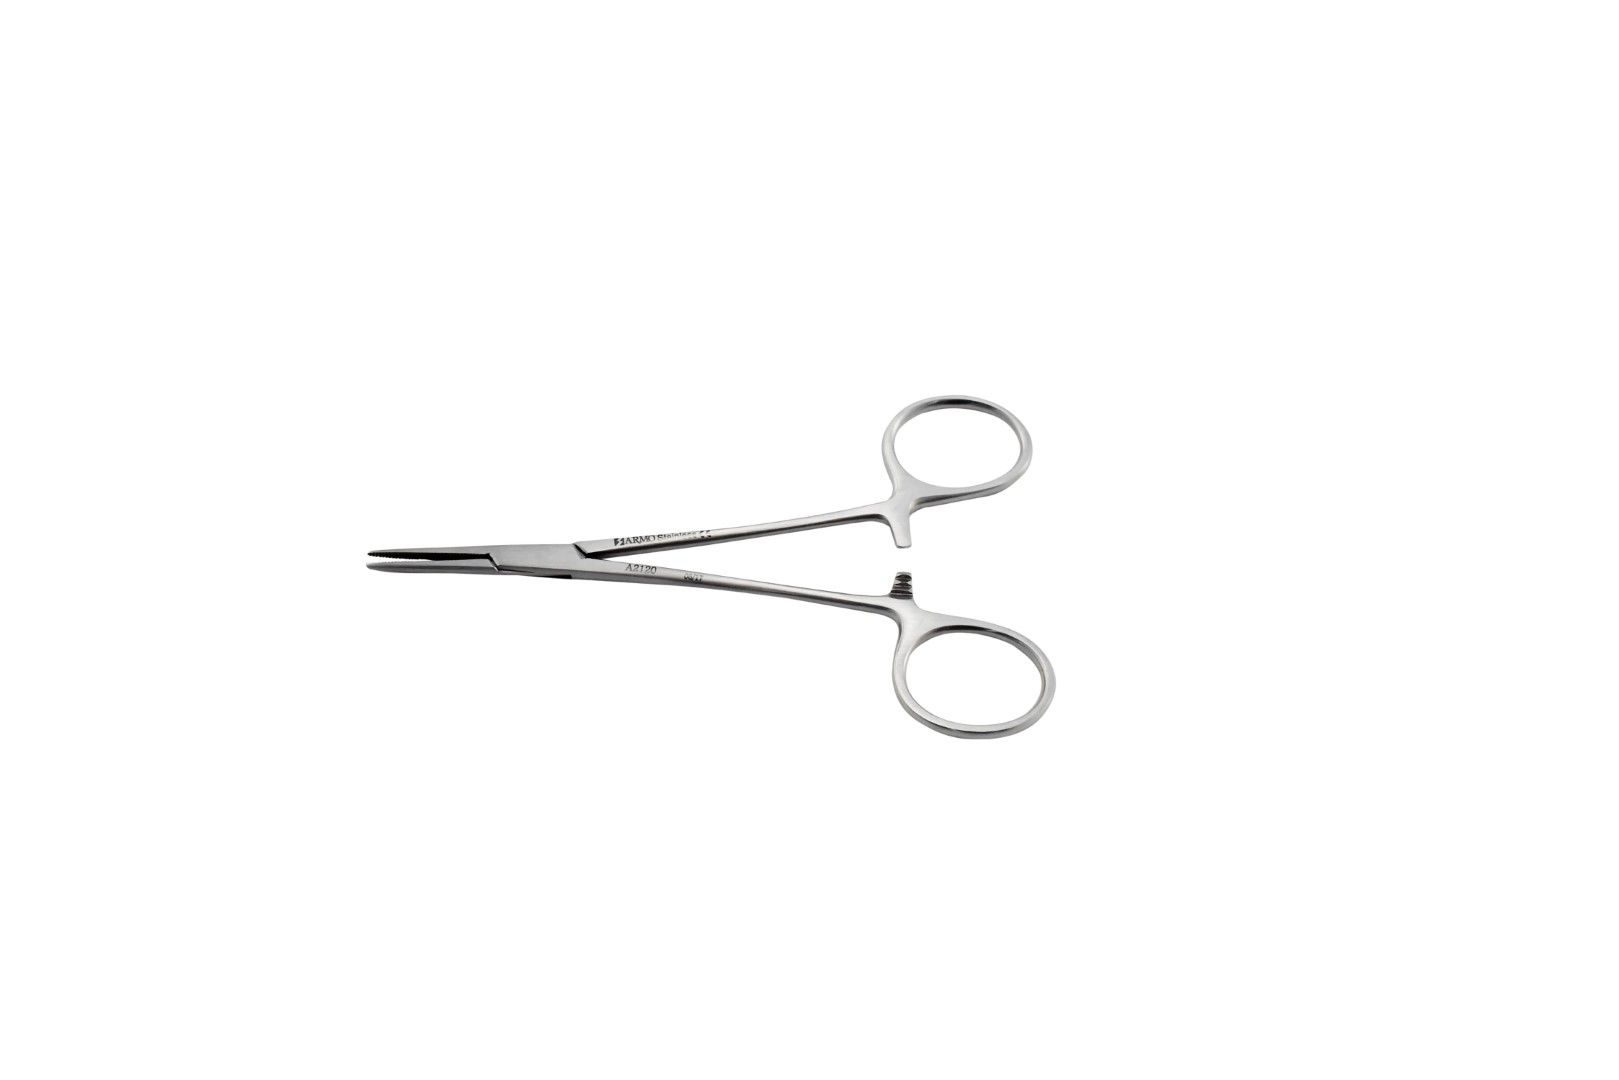 ARMO HALSTED-MOSQUITO ARTERY FORCEPS / STRAIGHT / 12.5CM photo